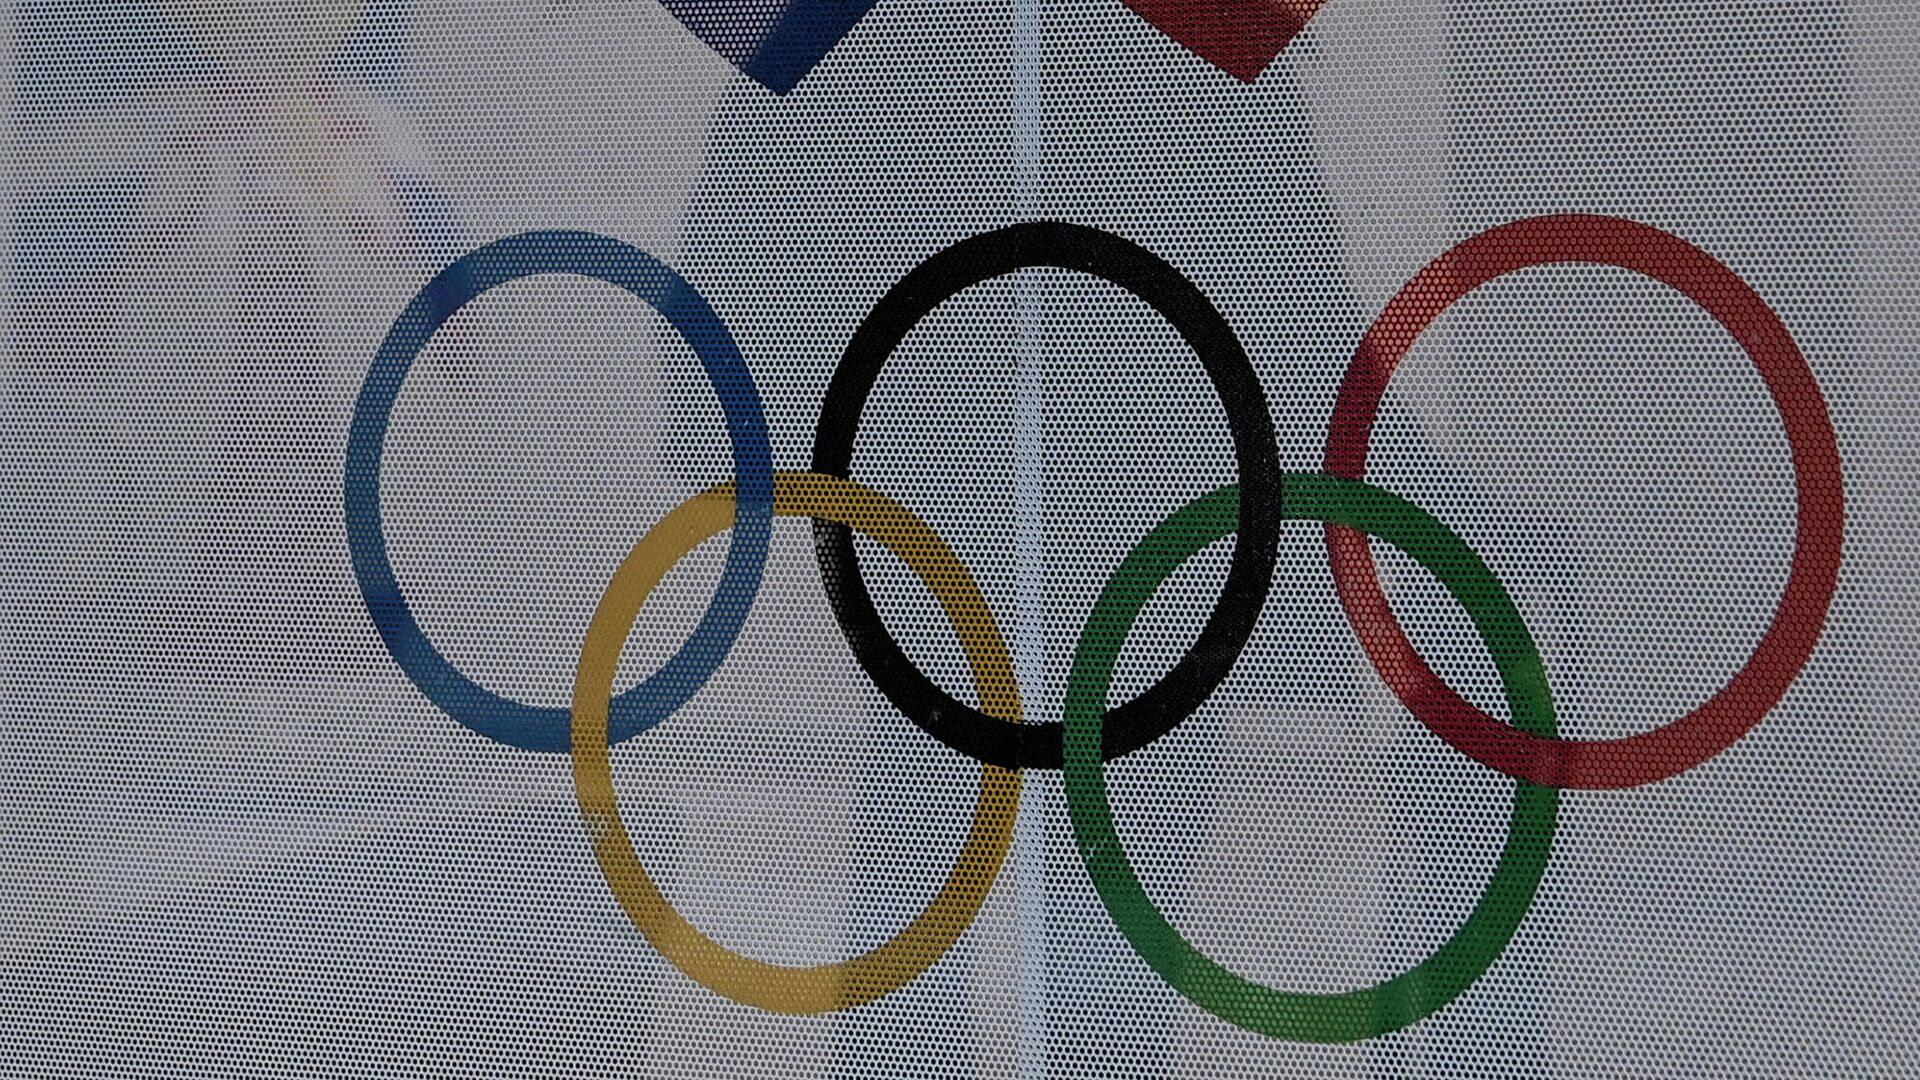 A picture shows the logo of the Russian Olympic Committee (ROC) on the window of its headquarters in Moscow on December 17, 2020, hours before the Court of Arbitration for Sport (CAS) is to deliver its verdict over Russia ban from international sports imposed following allegations of state-sanctioned doping. (Photo by Kirill KUDRYAVTSEV / AFP) - РИА Новости, 1920, 07.08.2021